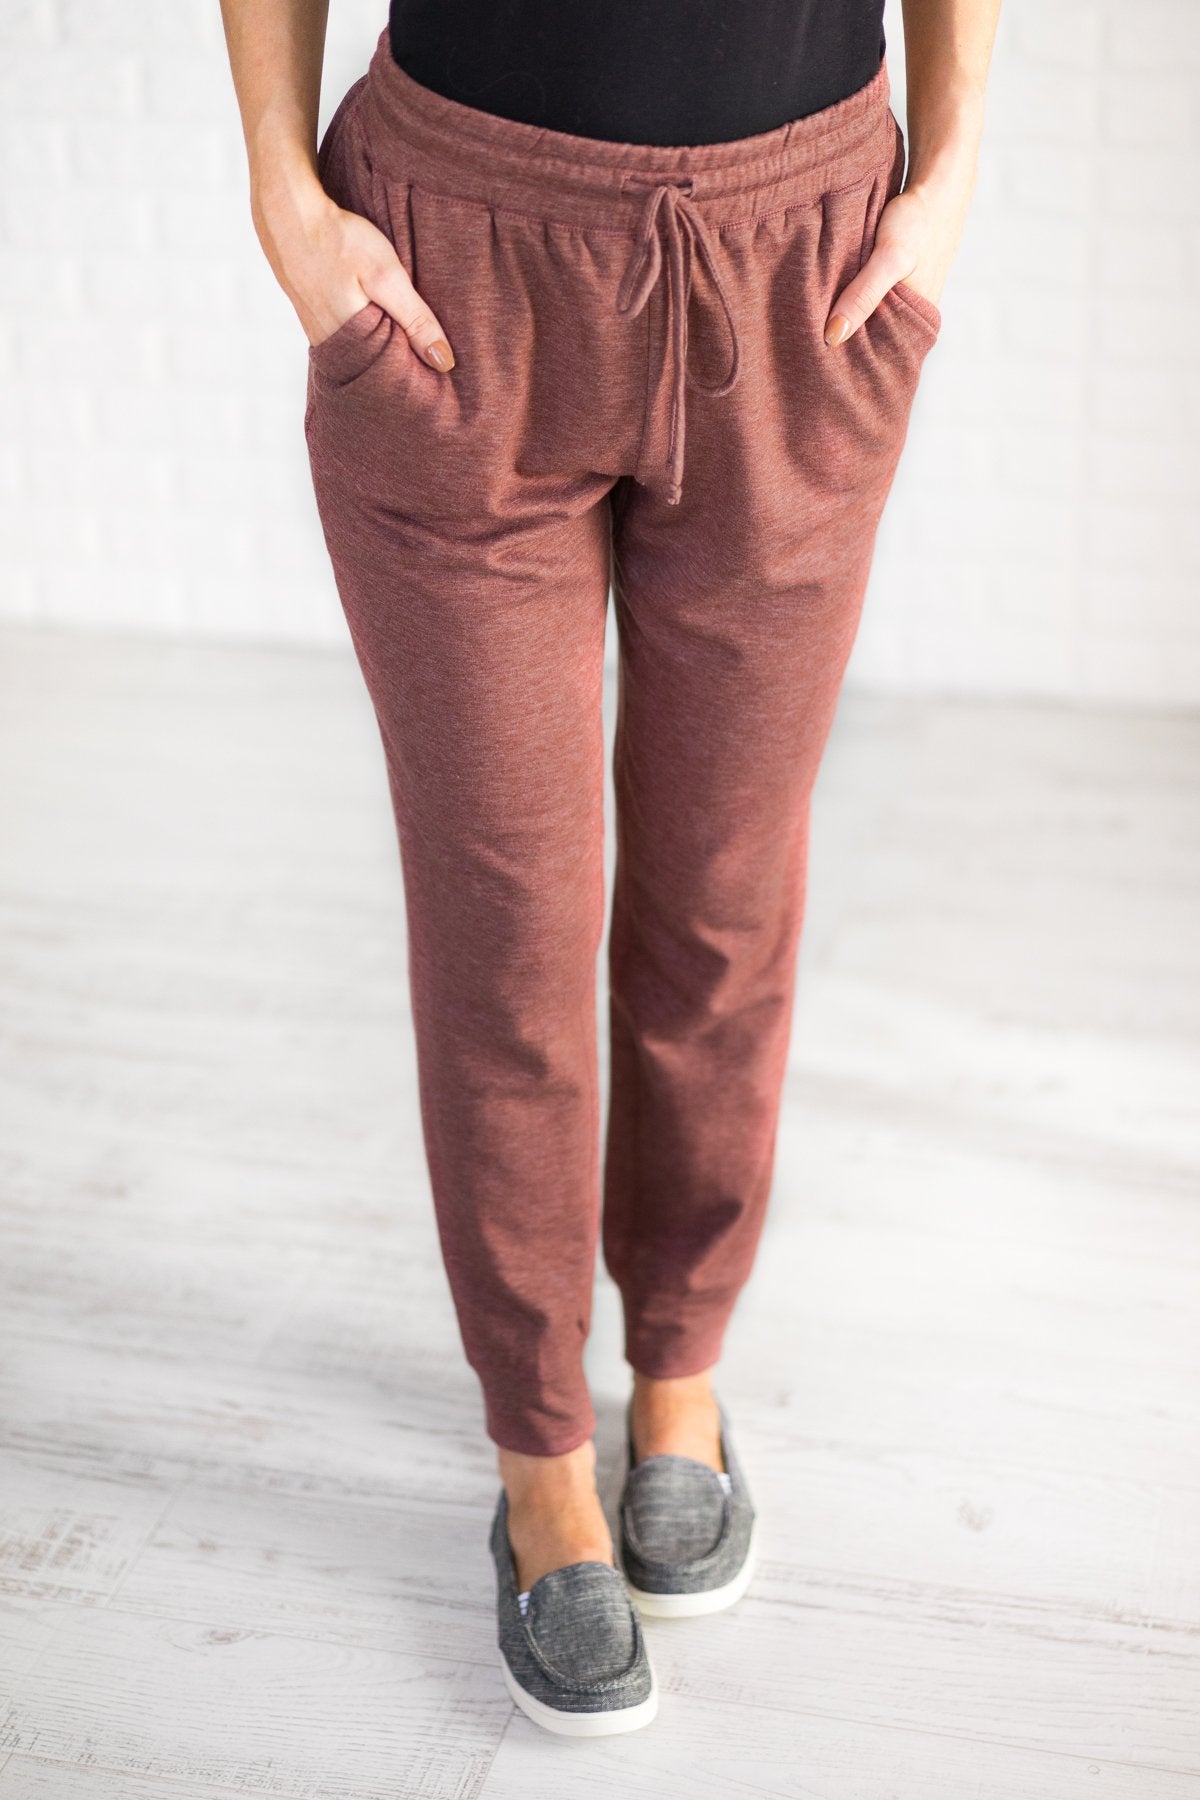 Coziest Joggers Ever ~ Rust Red